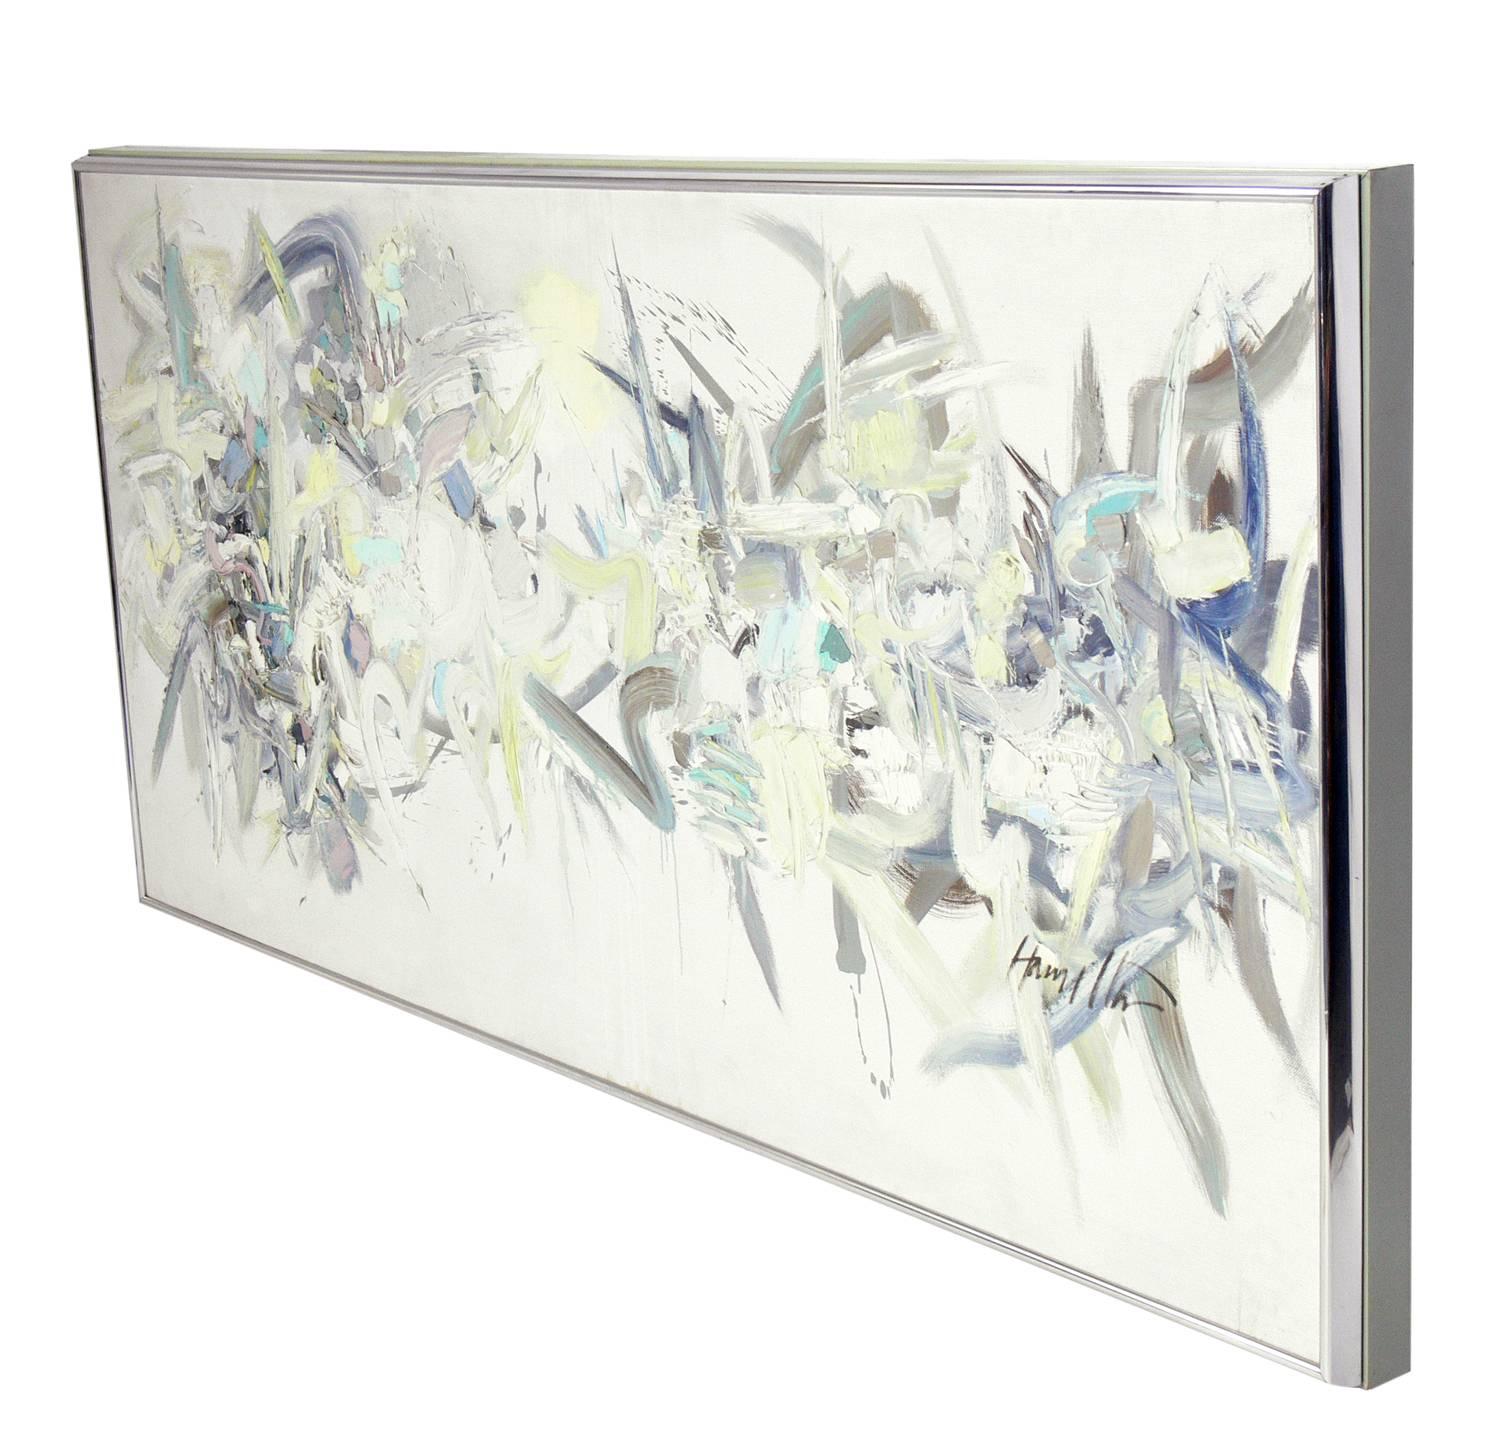 Large-scale abstract modernist painting by Hamilton, American, circa 1960s. It measures an impressive 6.5' width x 3' height approx. This painting is executed primarily in light greens, light yellows, blues, whites, and gray colors. It retains it's